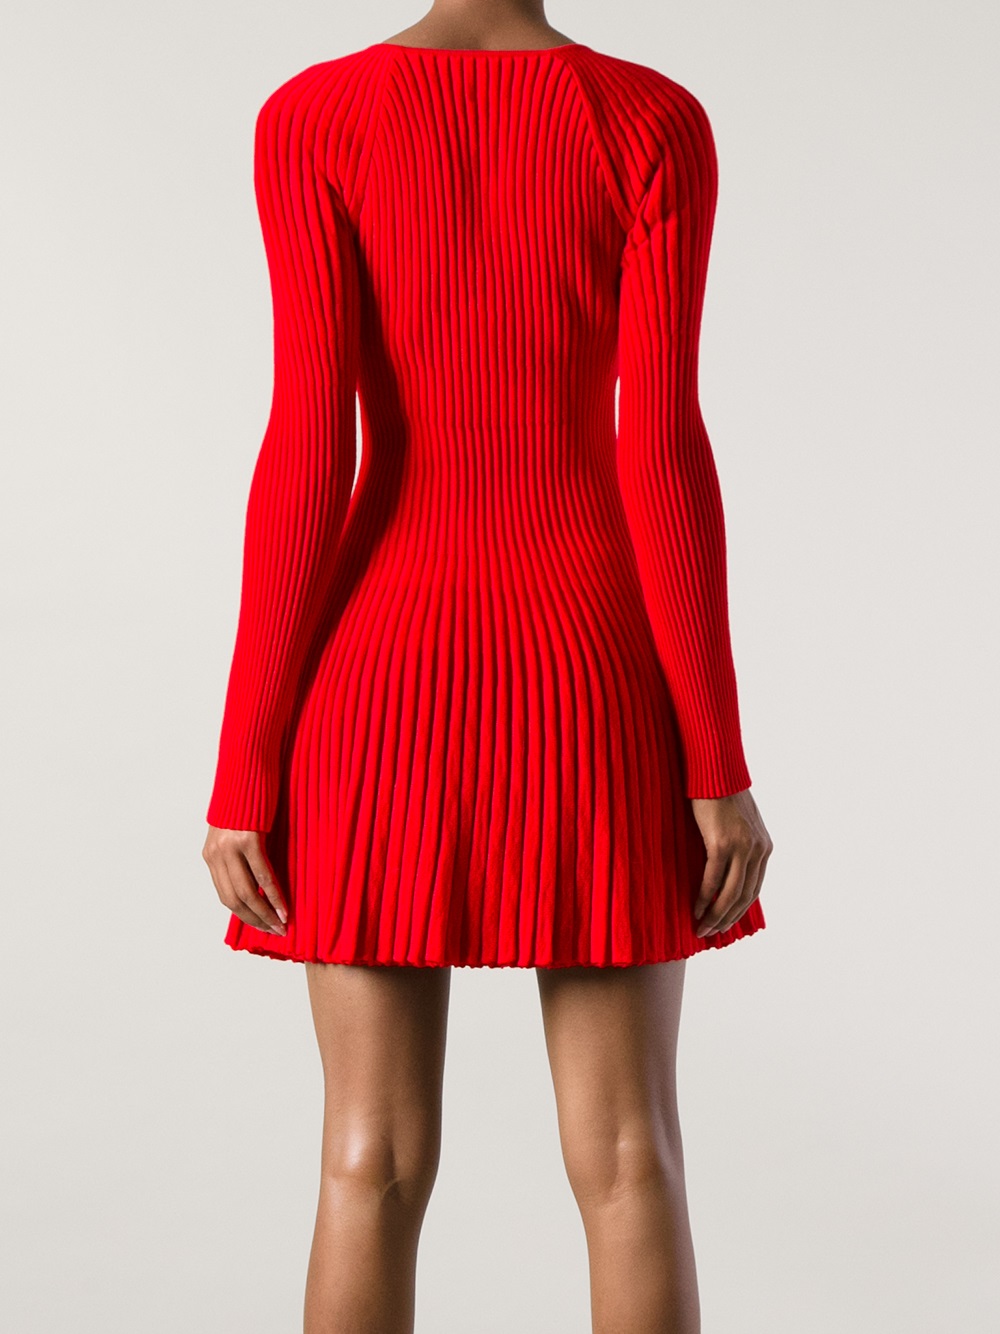 Lyst - Alexander McQueen Ribbed Knit Dress in Red